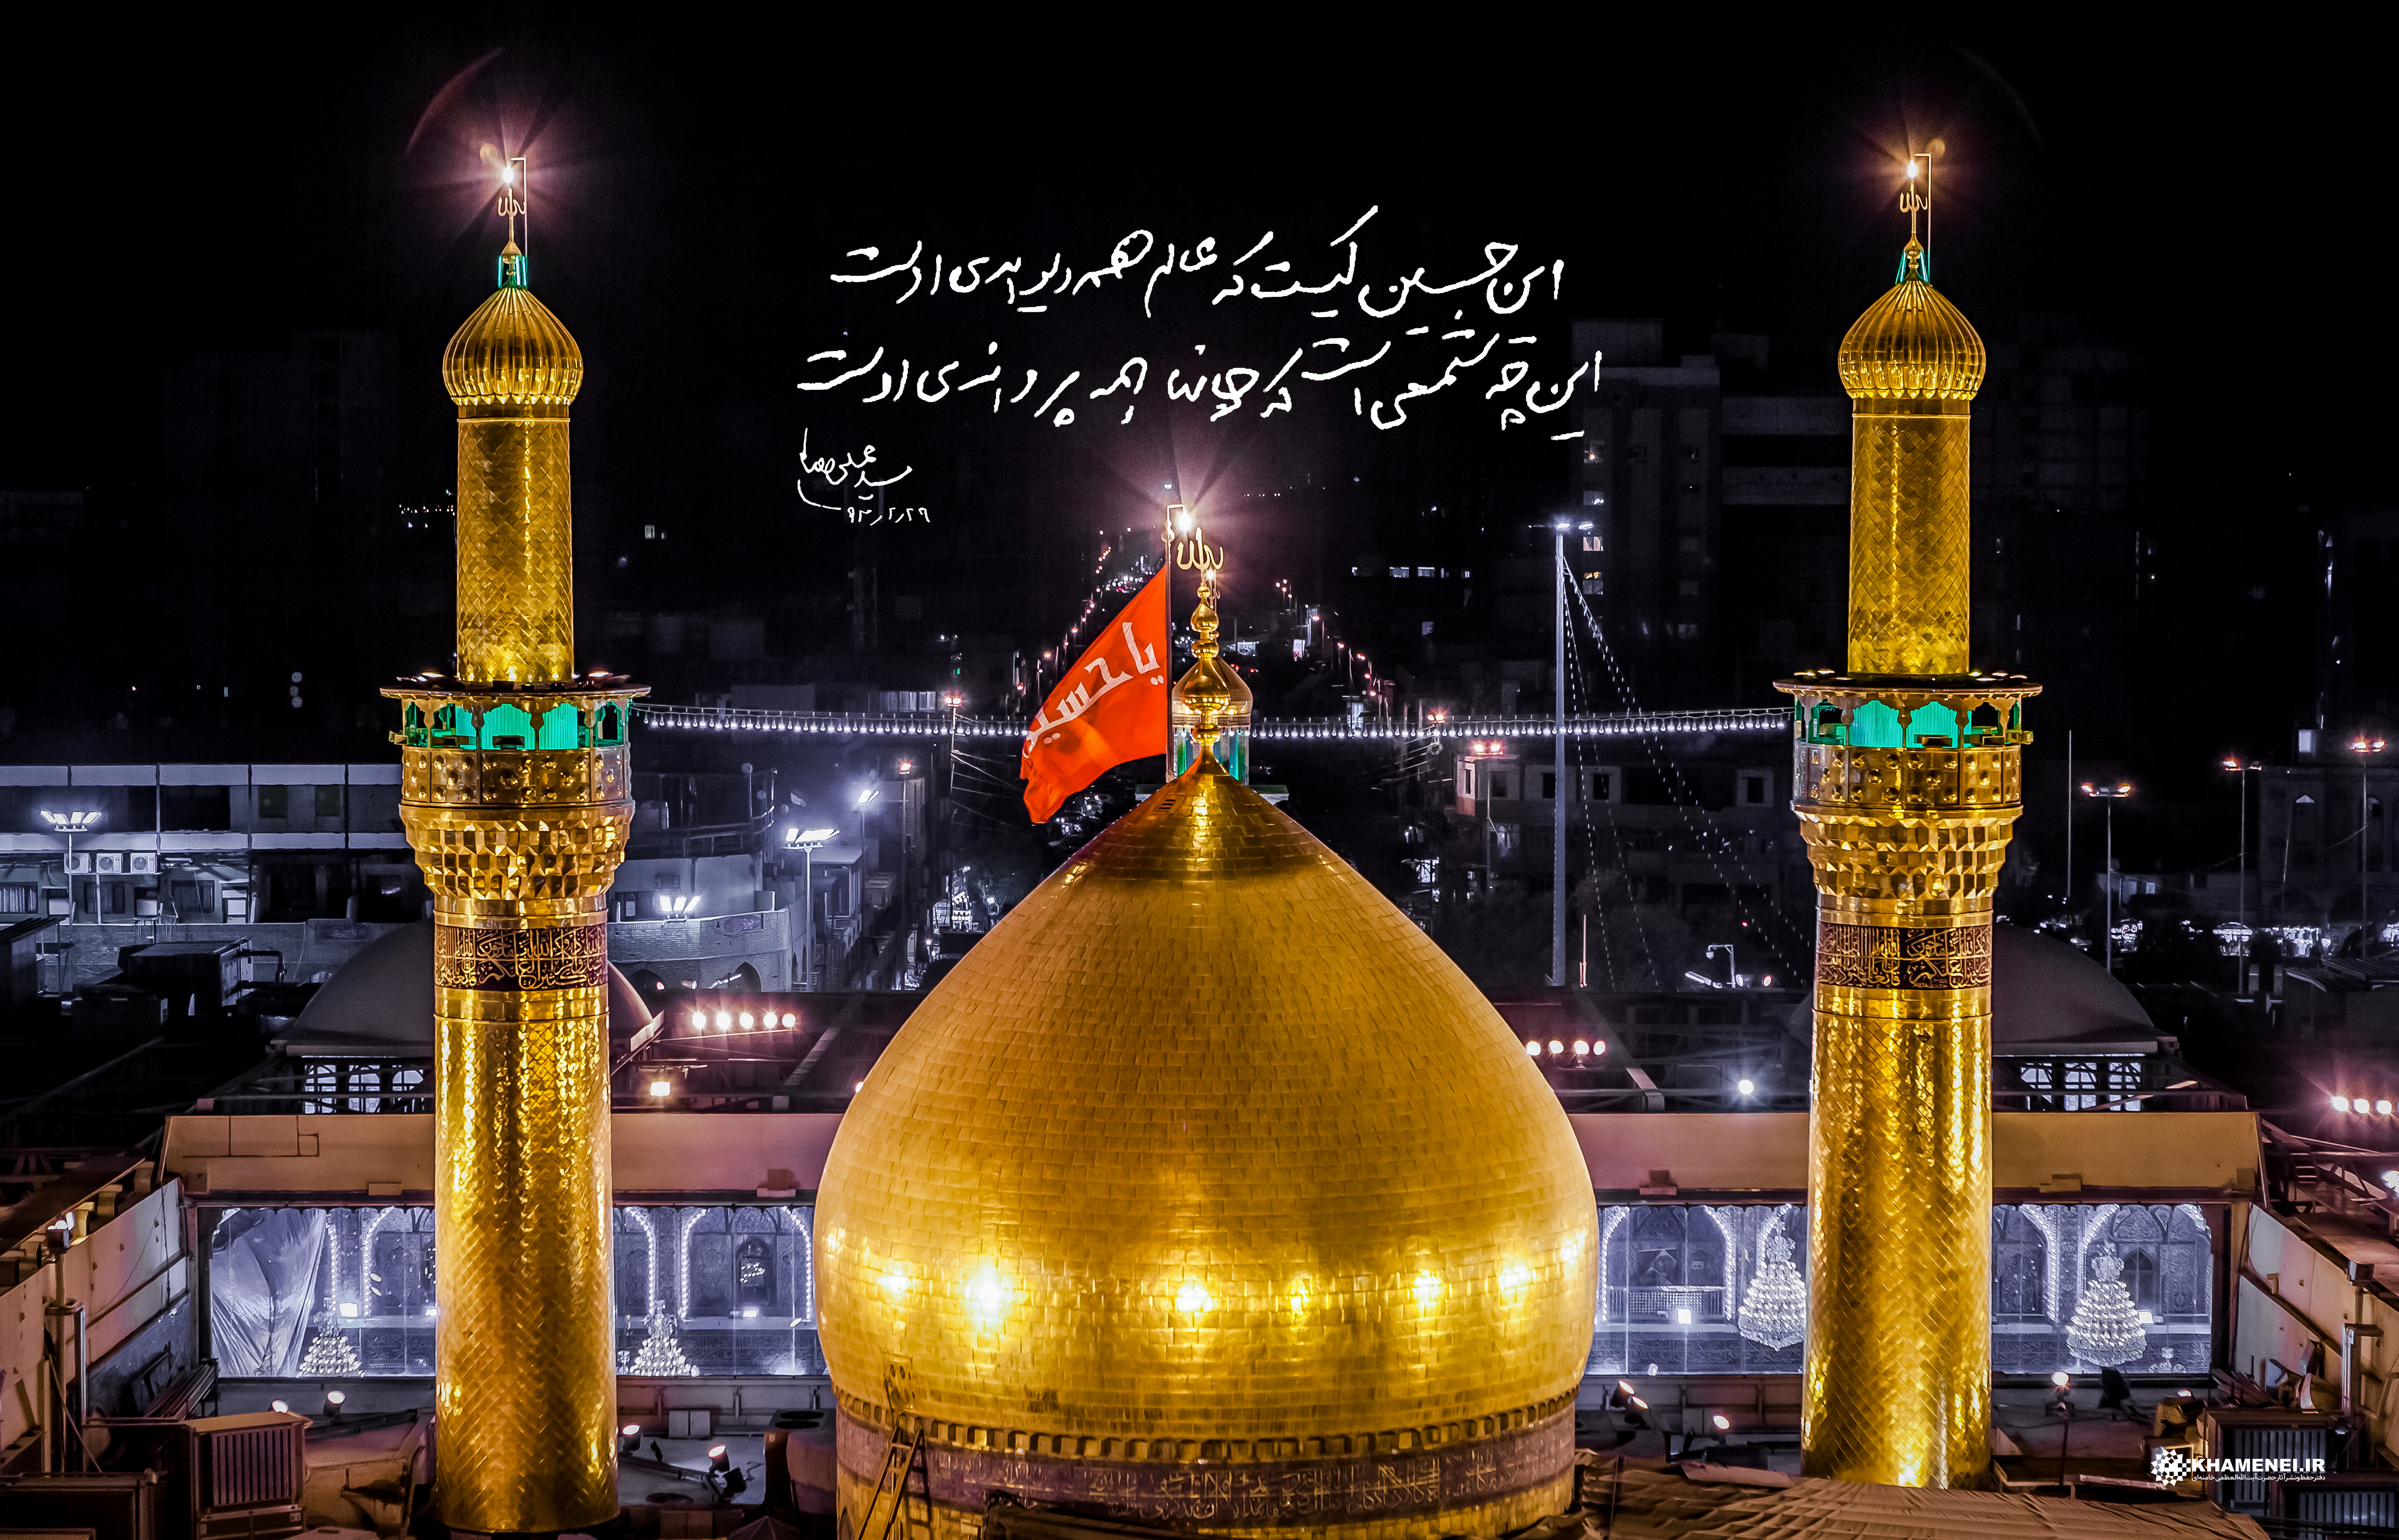 <strong>میلاد</strong> با <strong>سعادت</strong> حضرت امام حسین علیه <strong>السّلام</strong> و روز <strong>پاسدار</strong> <strong>مبارک</strong>